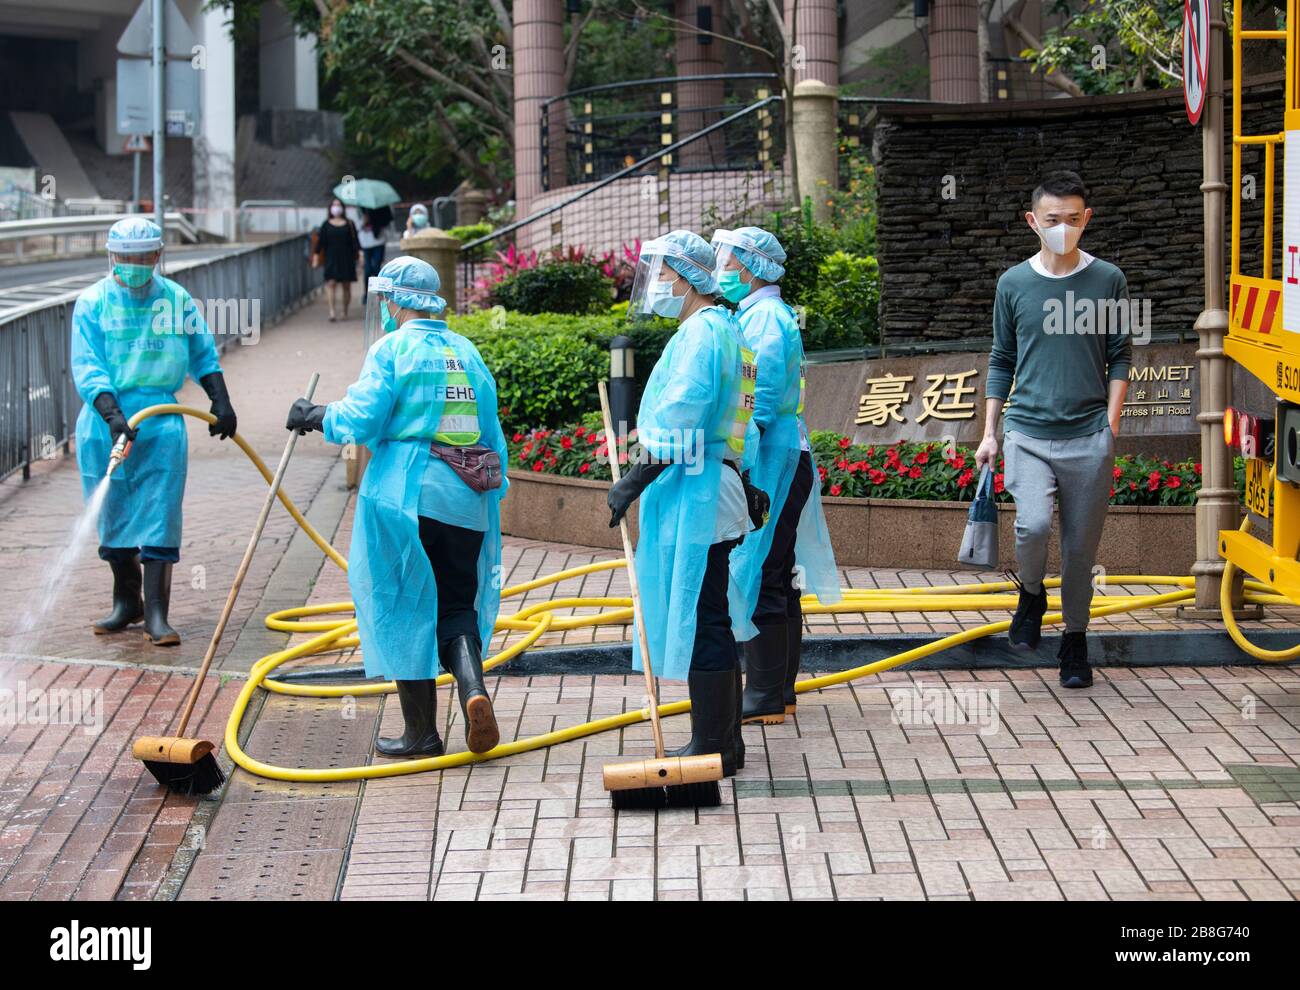 Hong Kong, Hong Kong, China. 10th Mar, 2020. Workers from the FEHD (The Food and Environmental Hygiene Department of the Hong Kong Government) disinfect the streets in Fortress Hill amid a rapid spike of Cover-19 virus infections.As the pandemic takes hold Hong Kongers, including students and travelers rushed back to the city before the border closure bringing the infection with them. Credit: Jayne Russell/ZUMA Wire/Alamy Live News Stock Photo